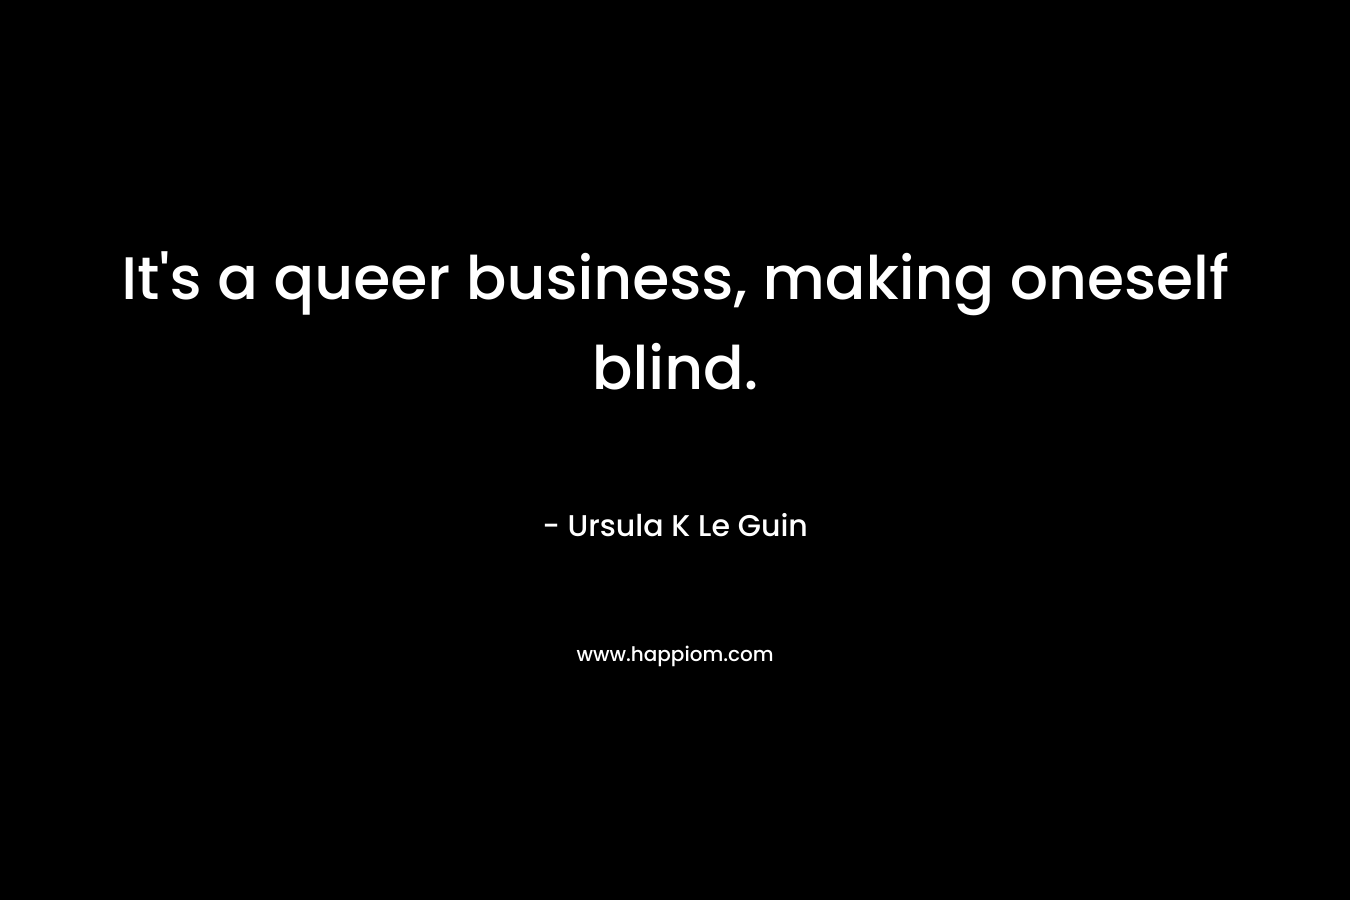 It’s a queer business, making oneself blind. – Ursula K Le Guin